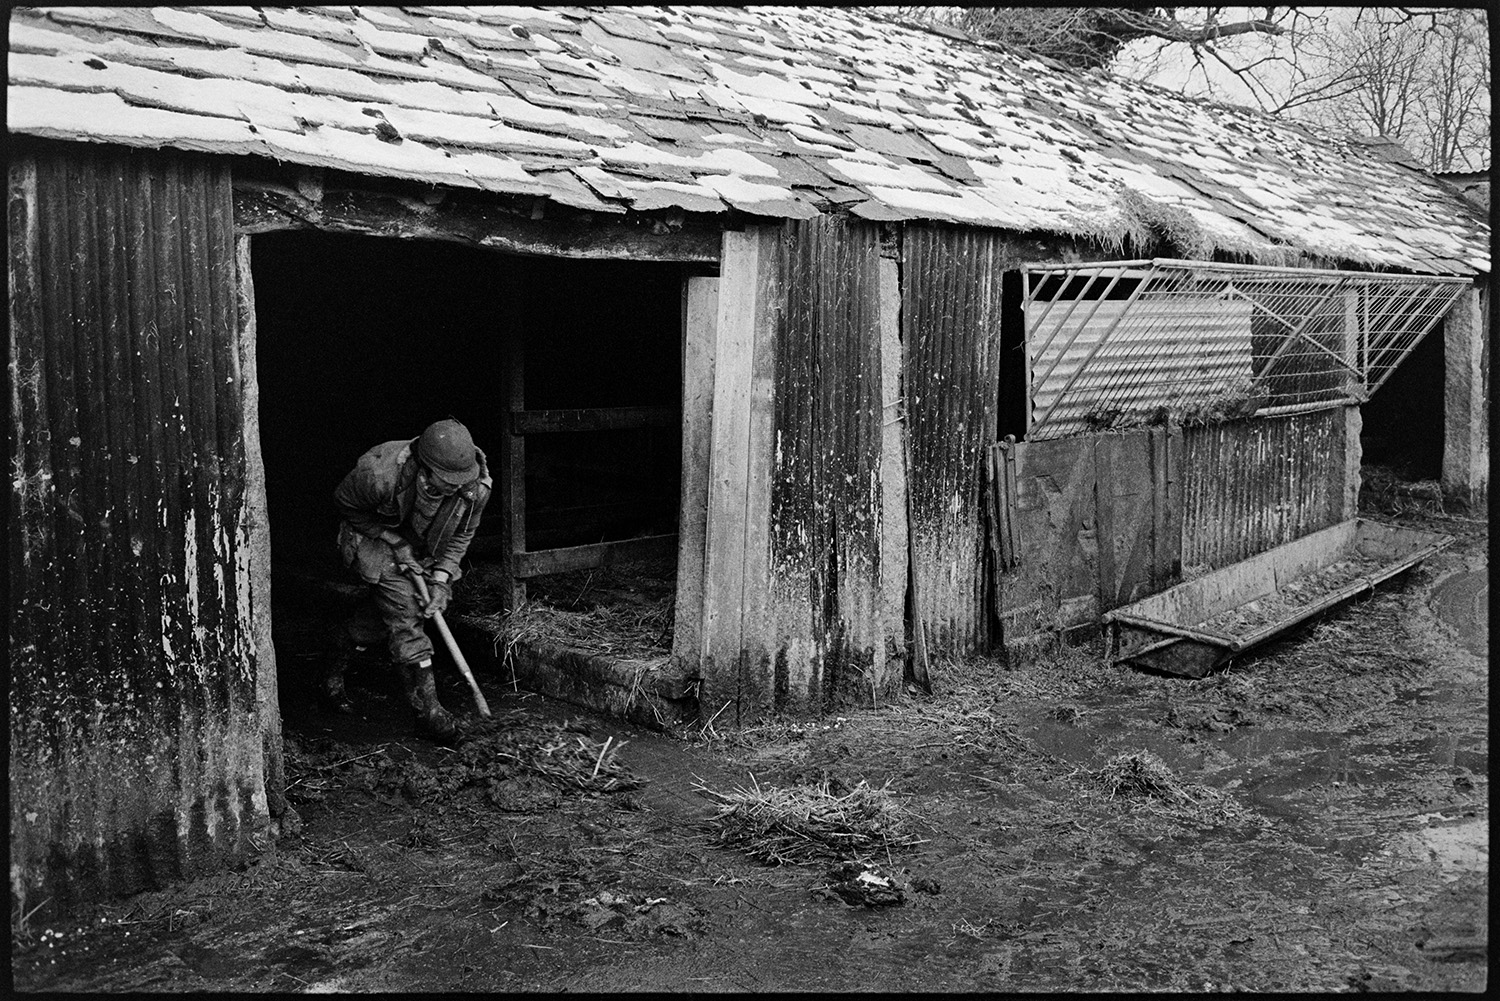 A man mucking out a corrugated iron barn at Hatherleigh. A trough and hay rack can be seen outside the barn. This was possibly the site of a new supermarket.